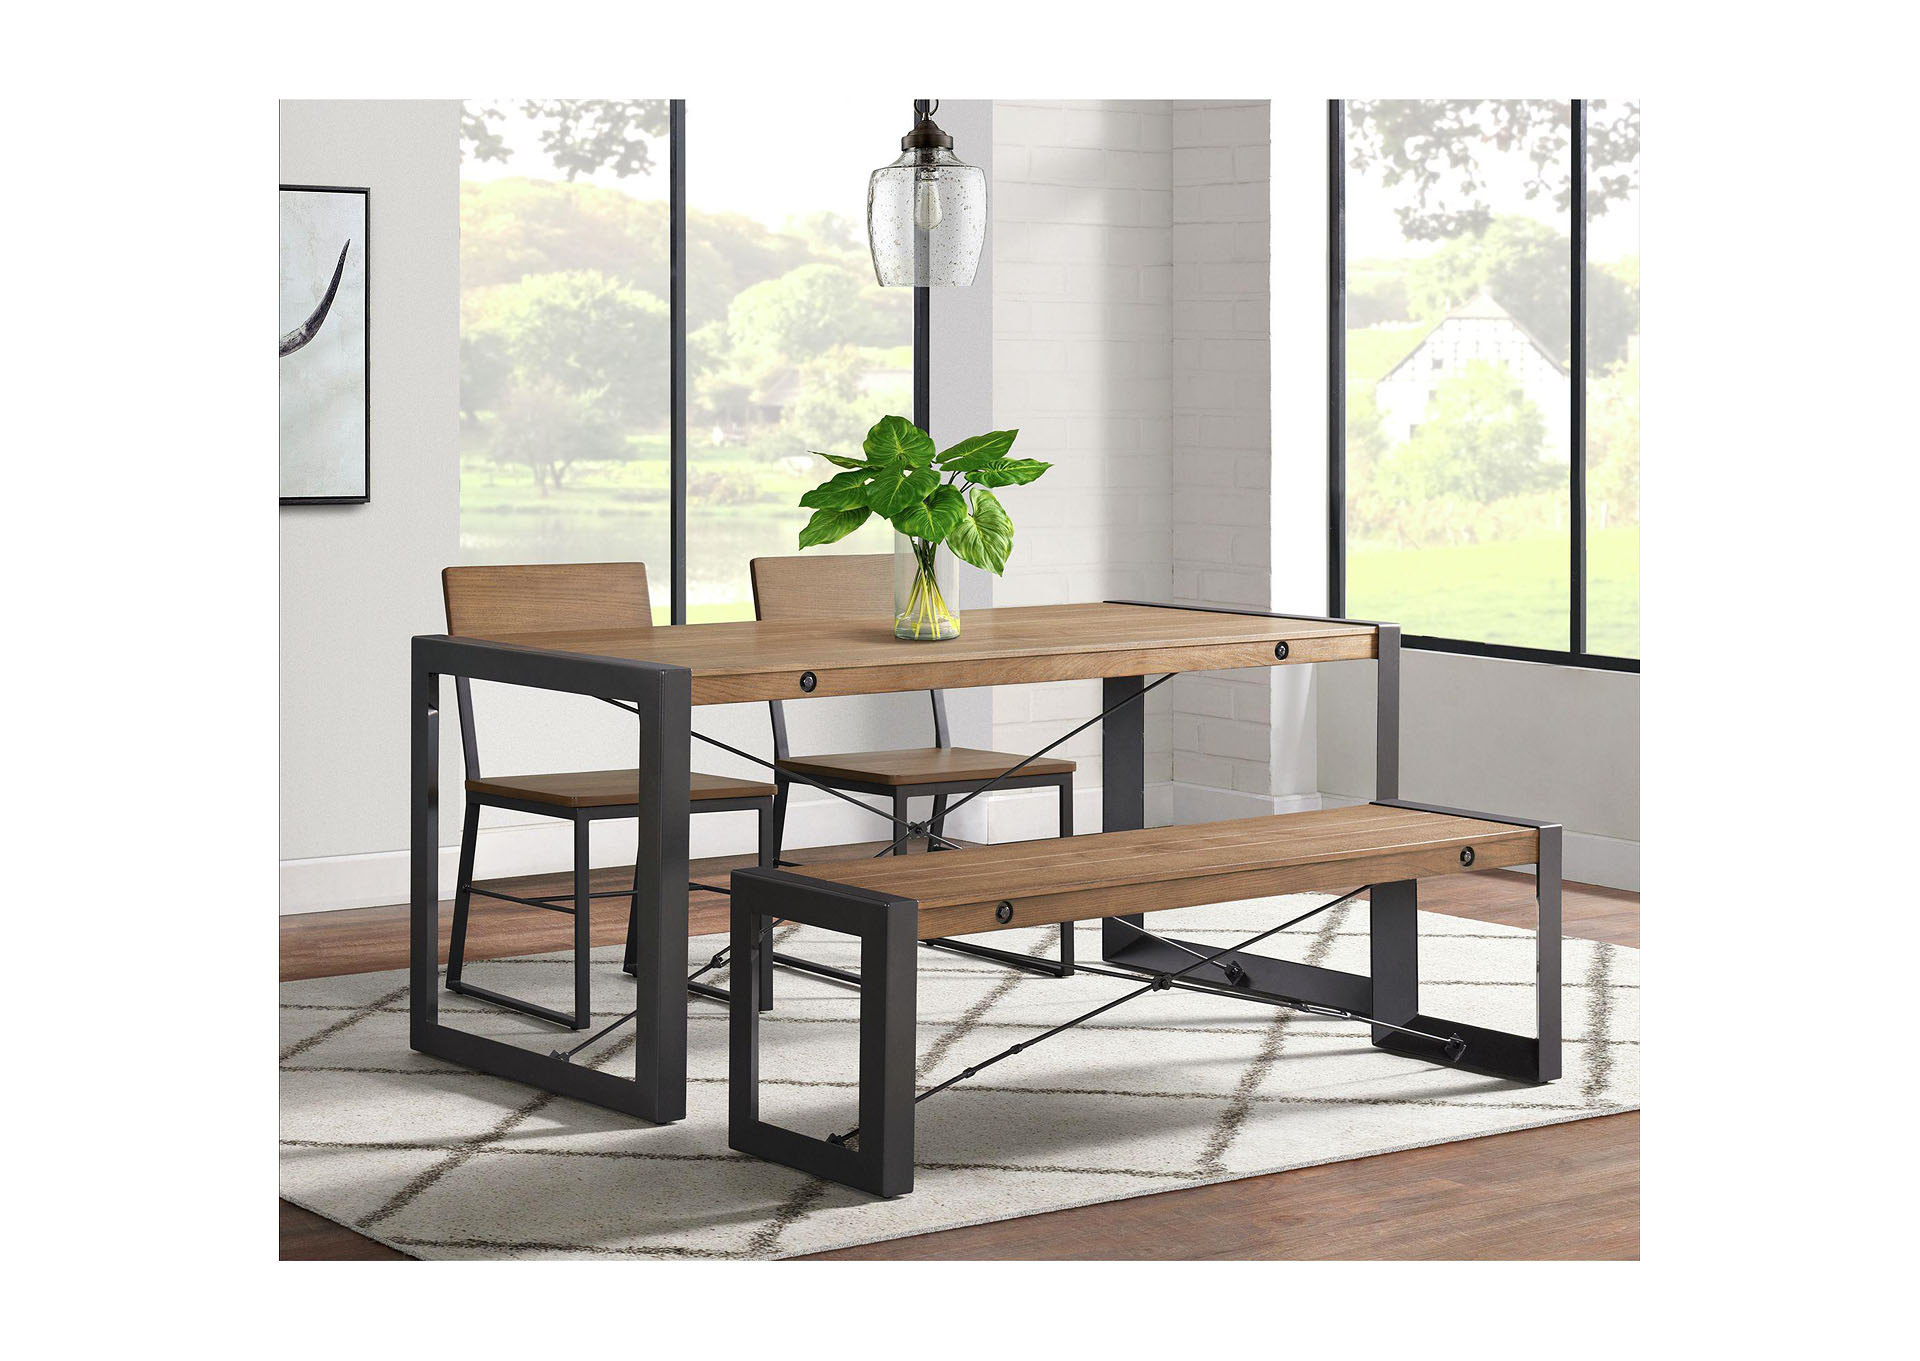 Industrial 4 Piece Dining Set In Walnut - Table Two Chairs Bench,Elements